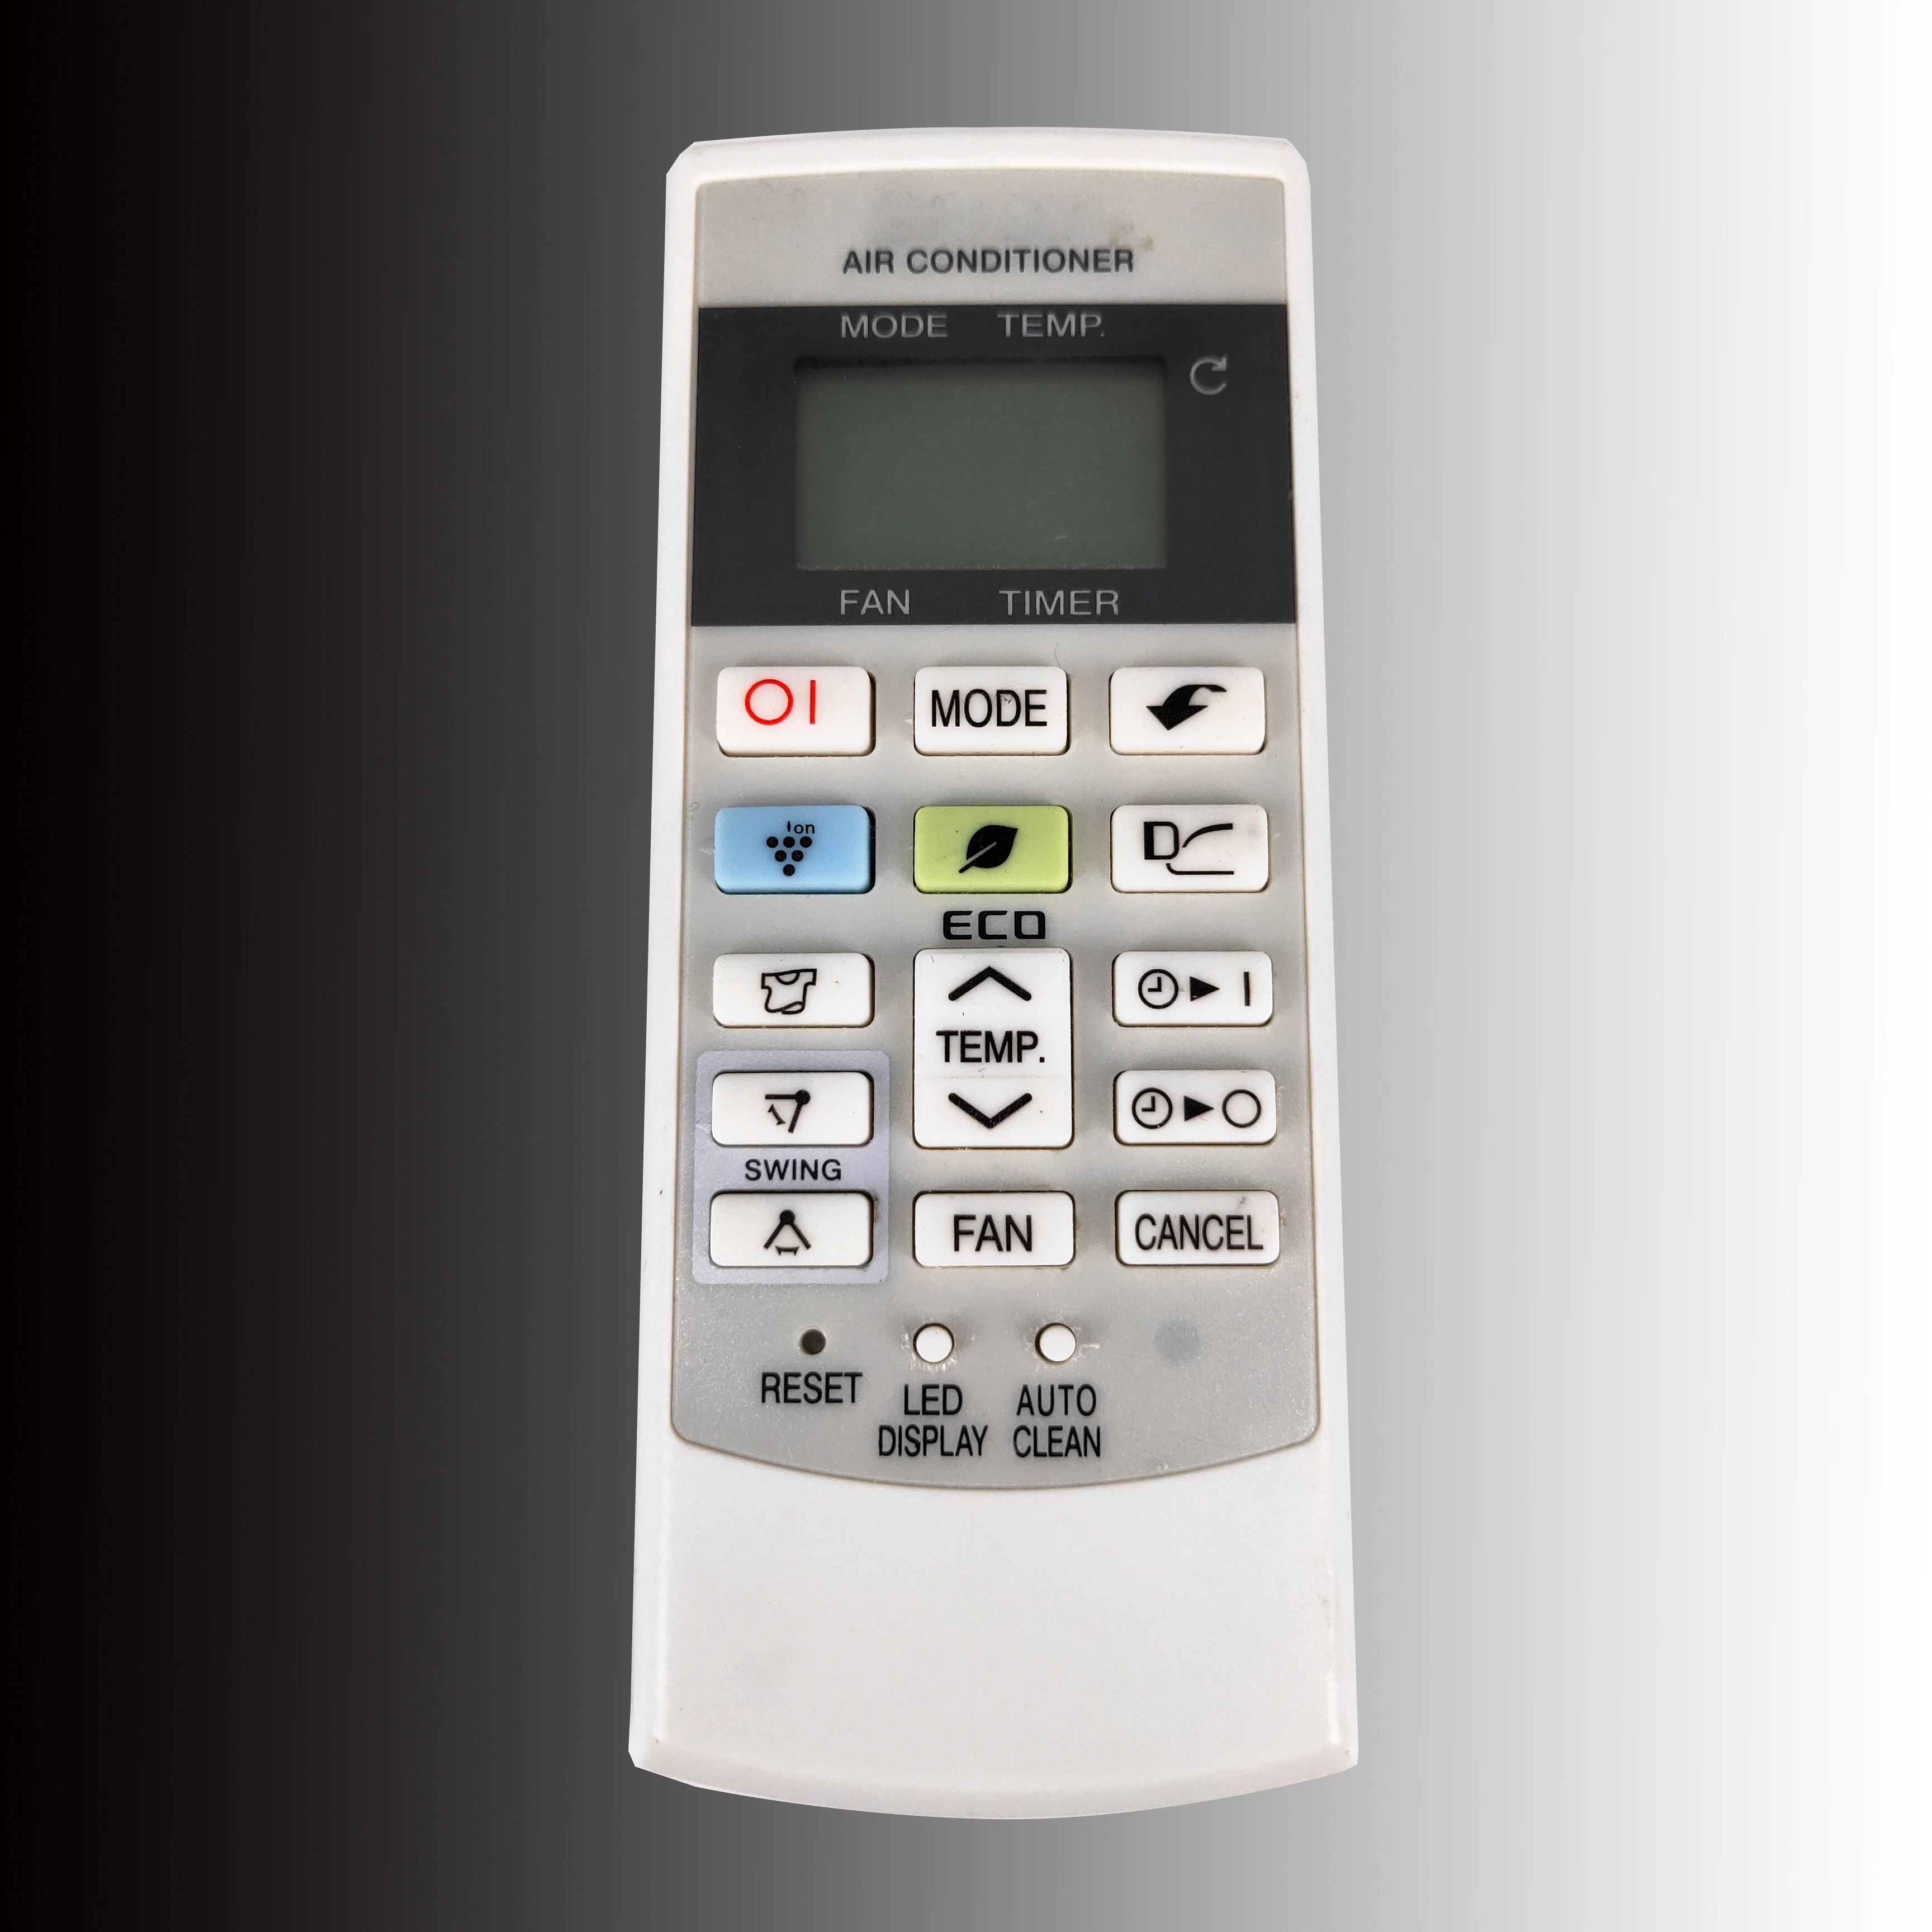 

NEW AC Remote control CRMC-A876JBEZ FOR SHARP AIR CONDITIONER AIR CONDITIONING Fernbedienung